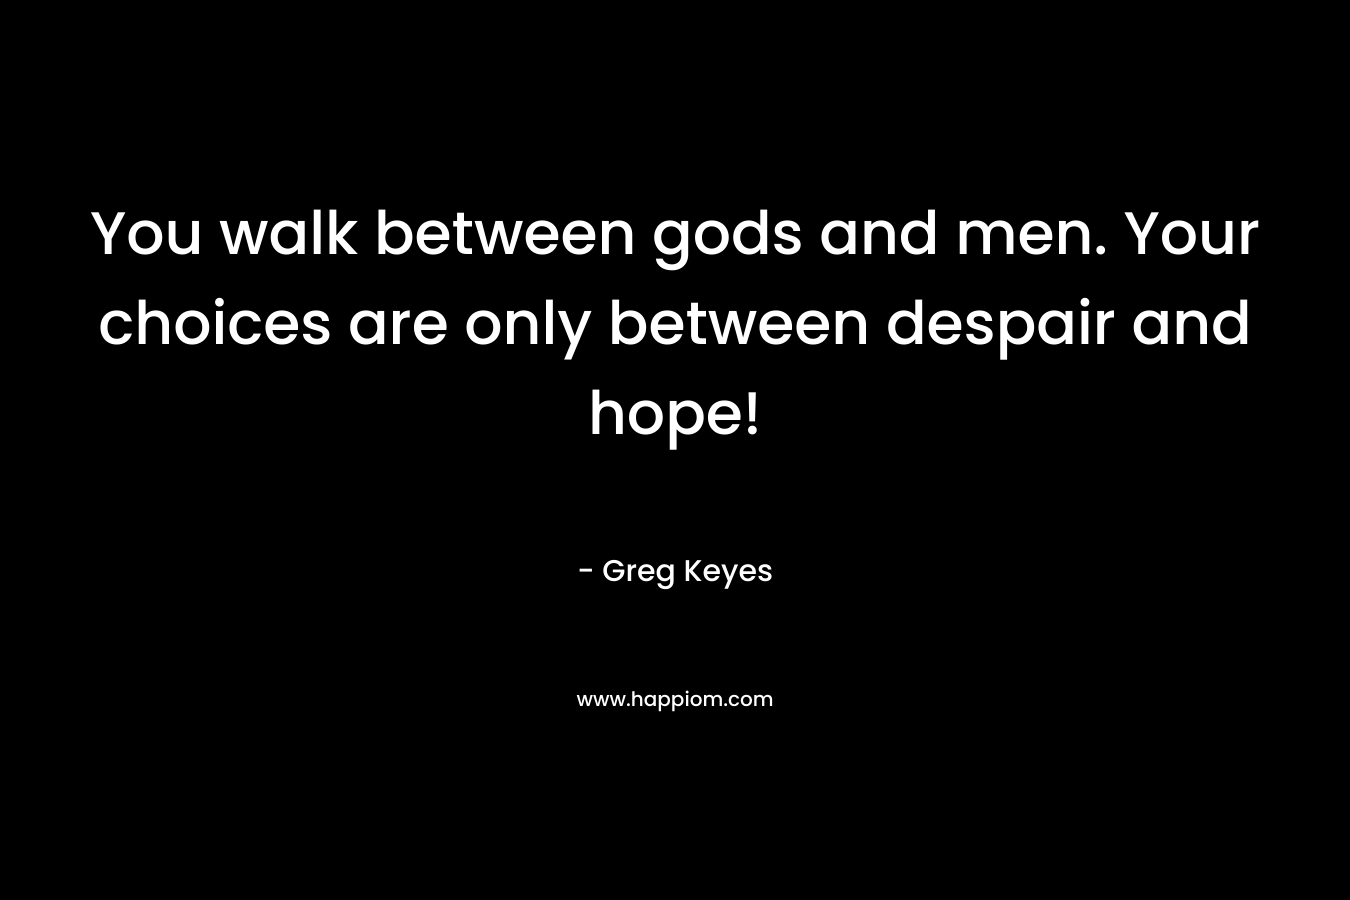 You walk between gods and men. Your choices are only between despair and hope!